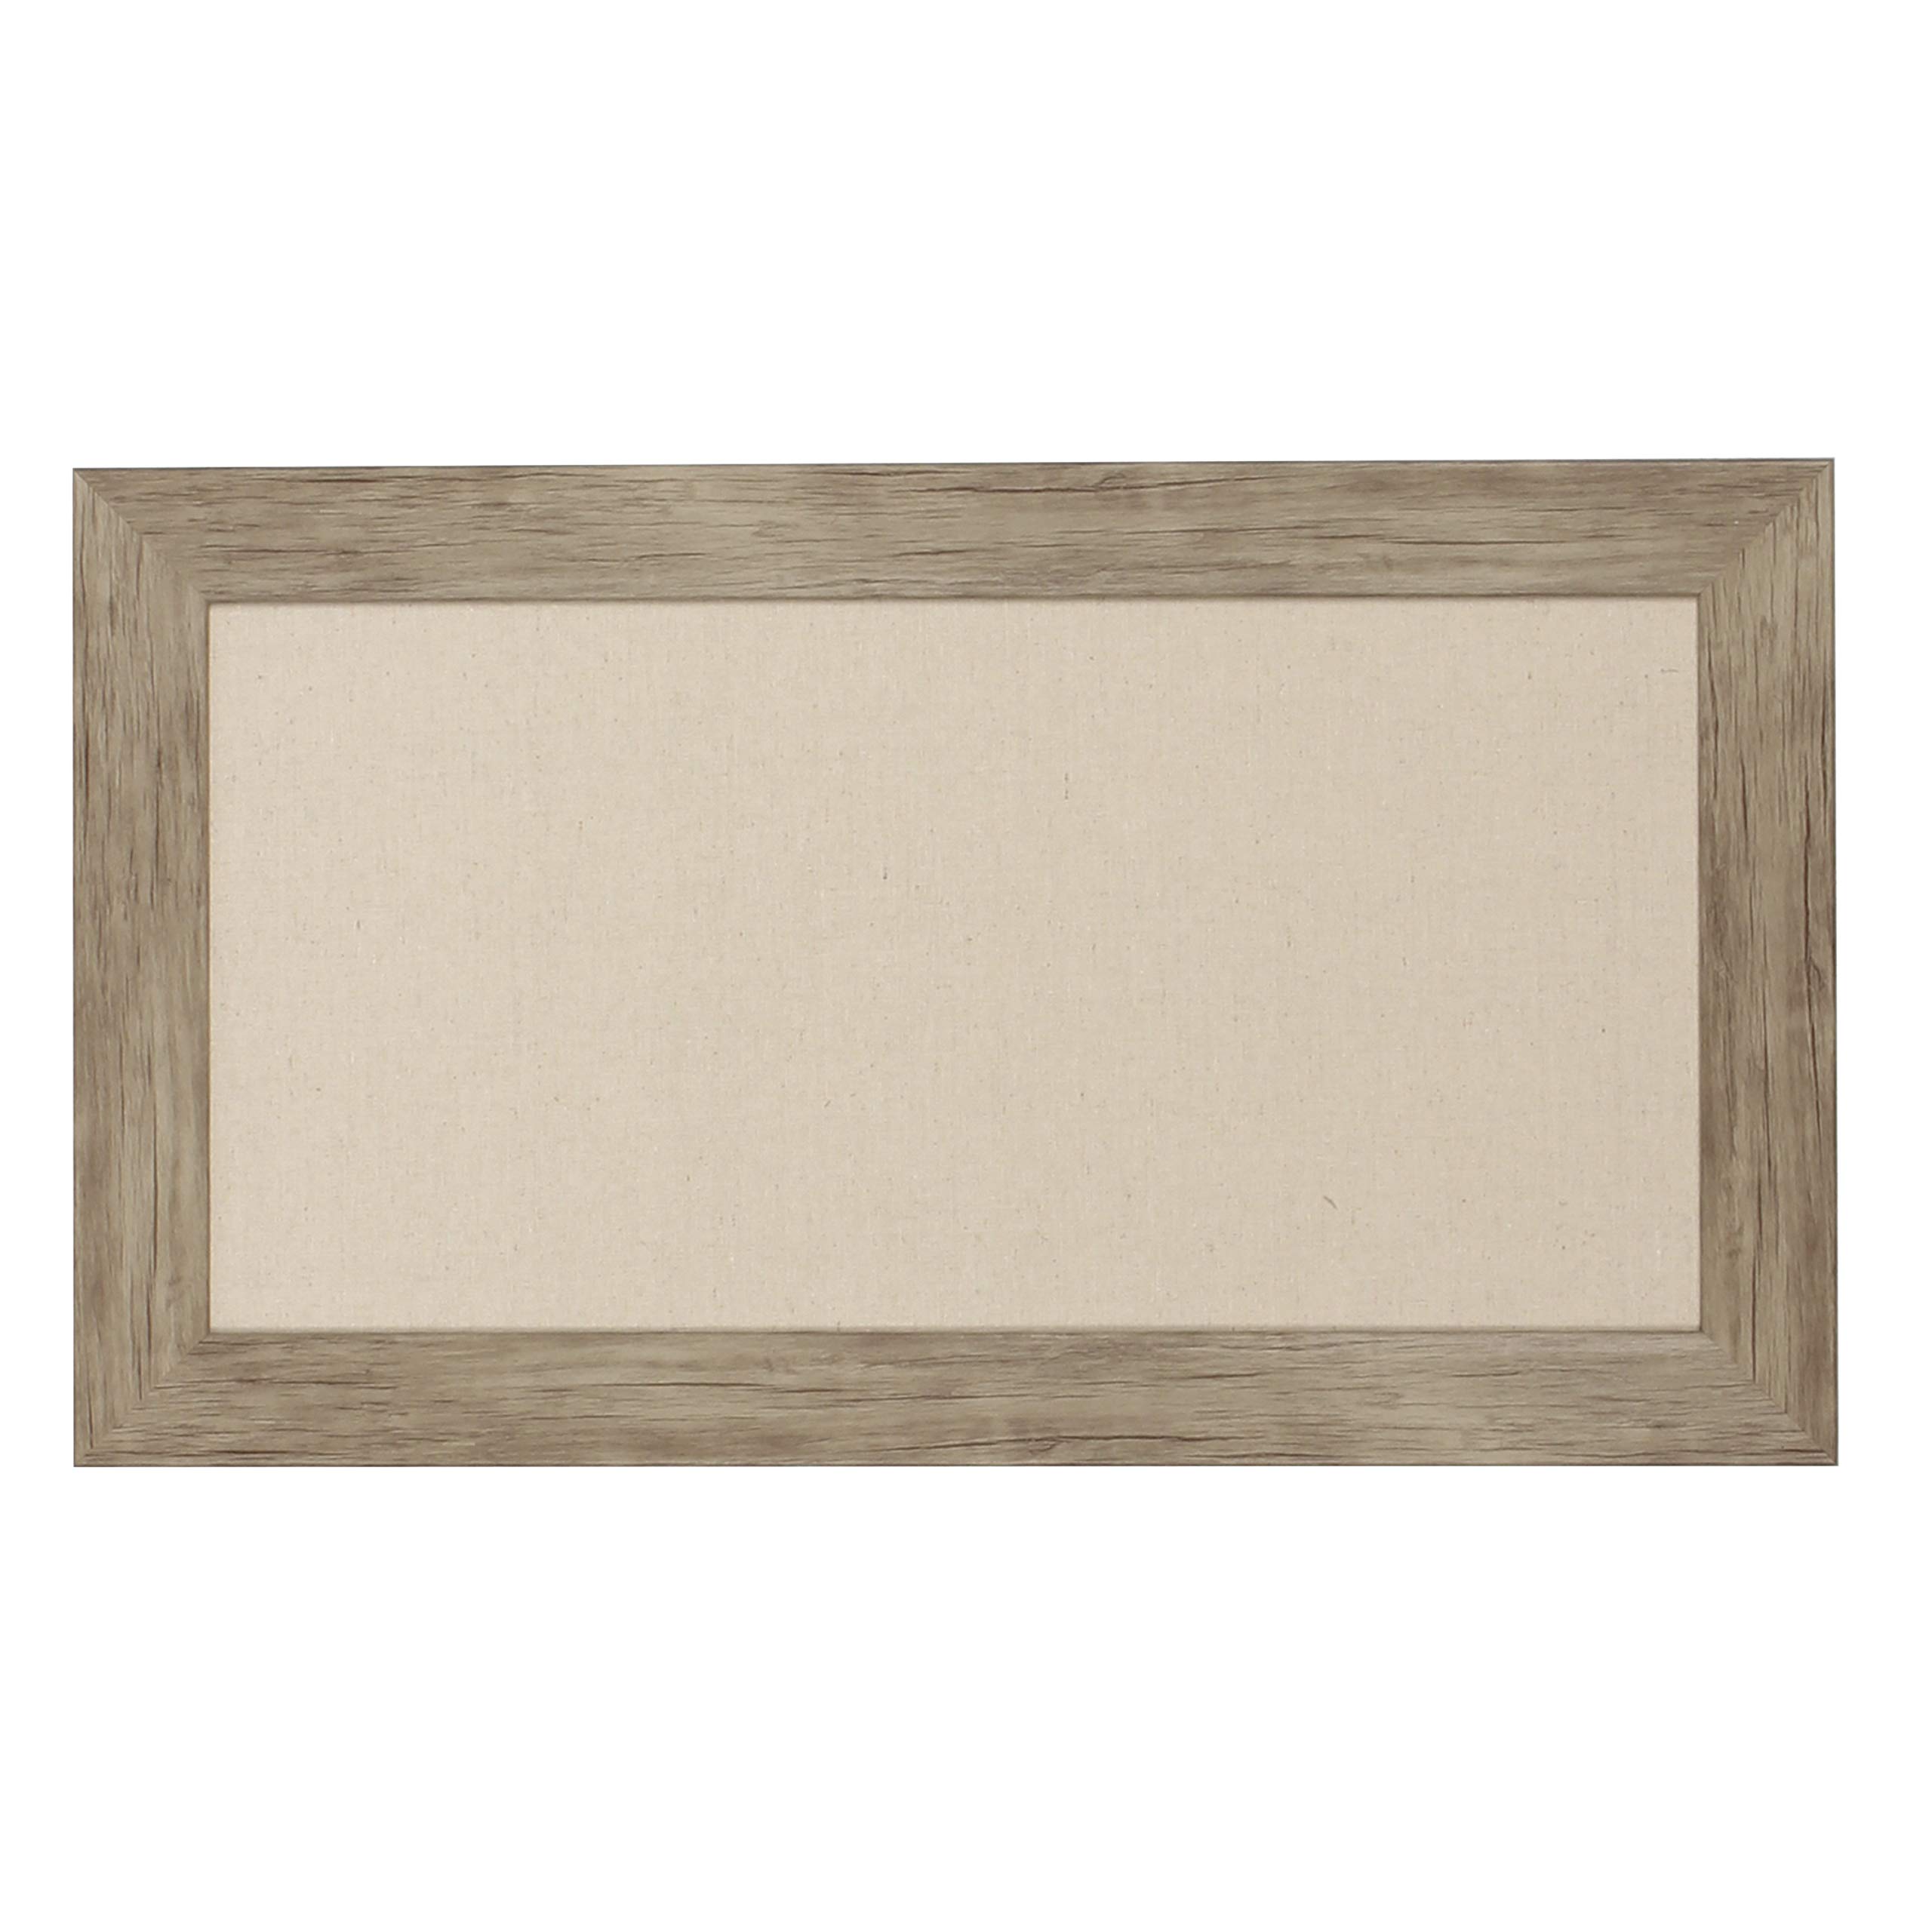 DesignOvation Beatrice Framed Linen Fabric Pinboard, 13x23, Rustic Brown